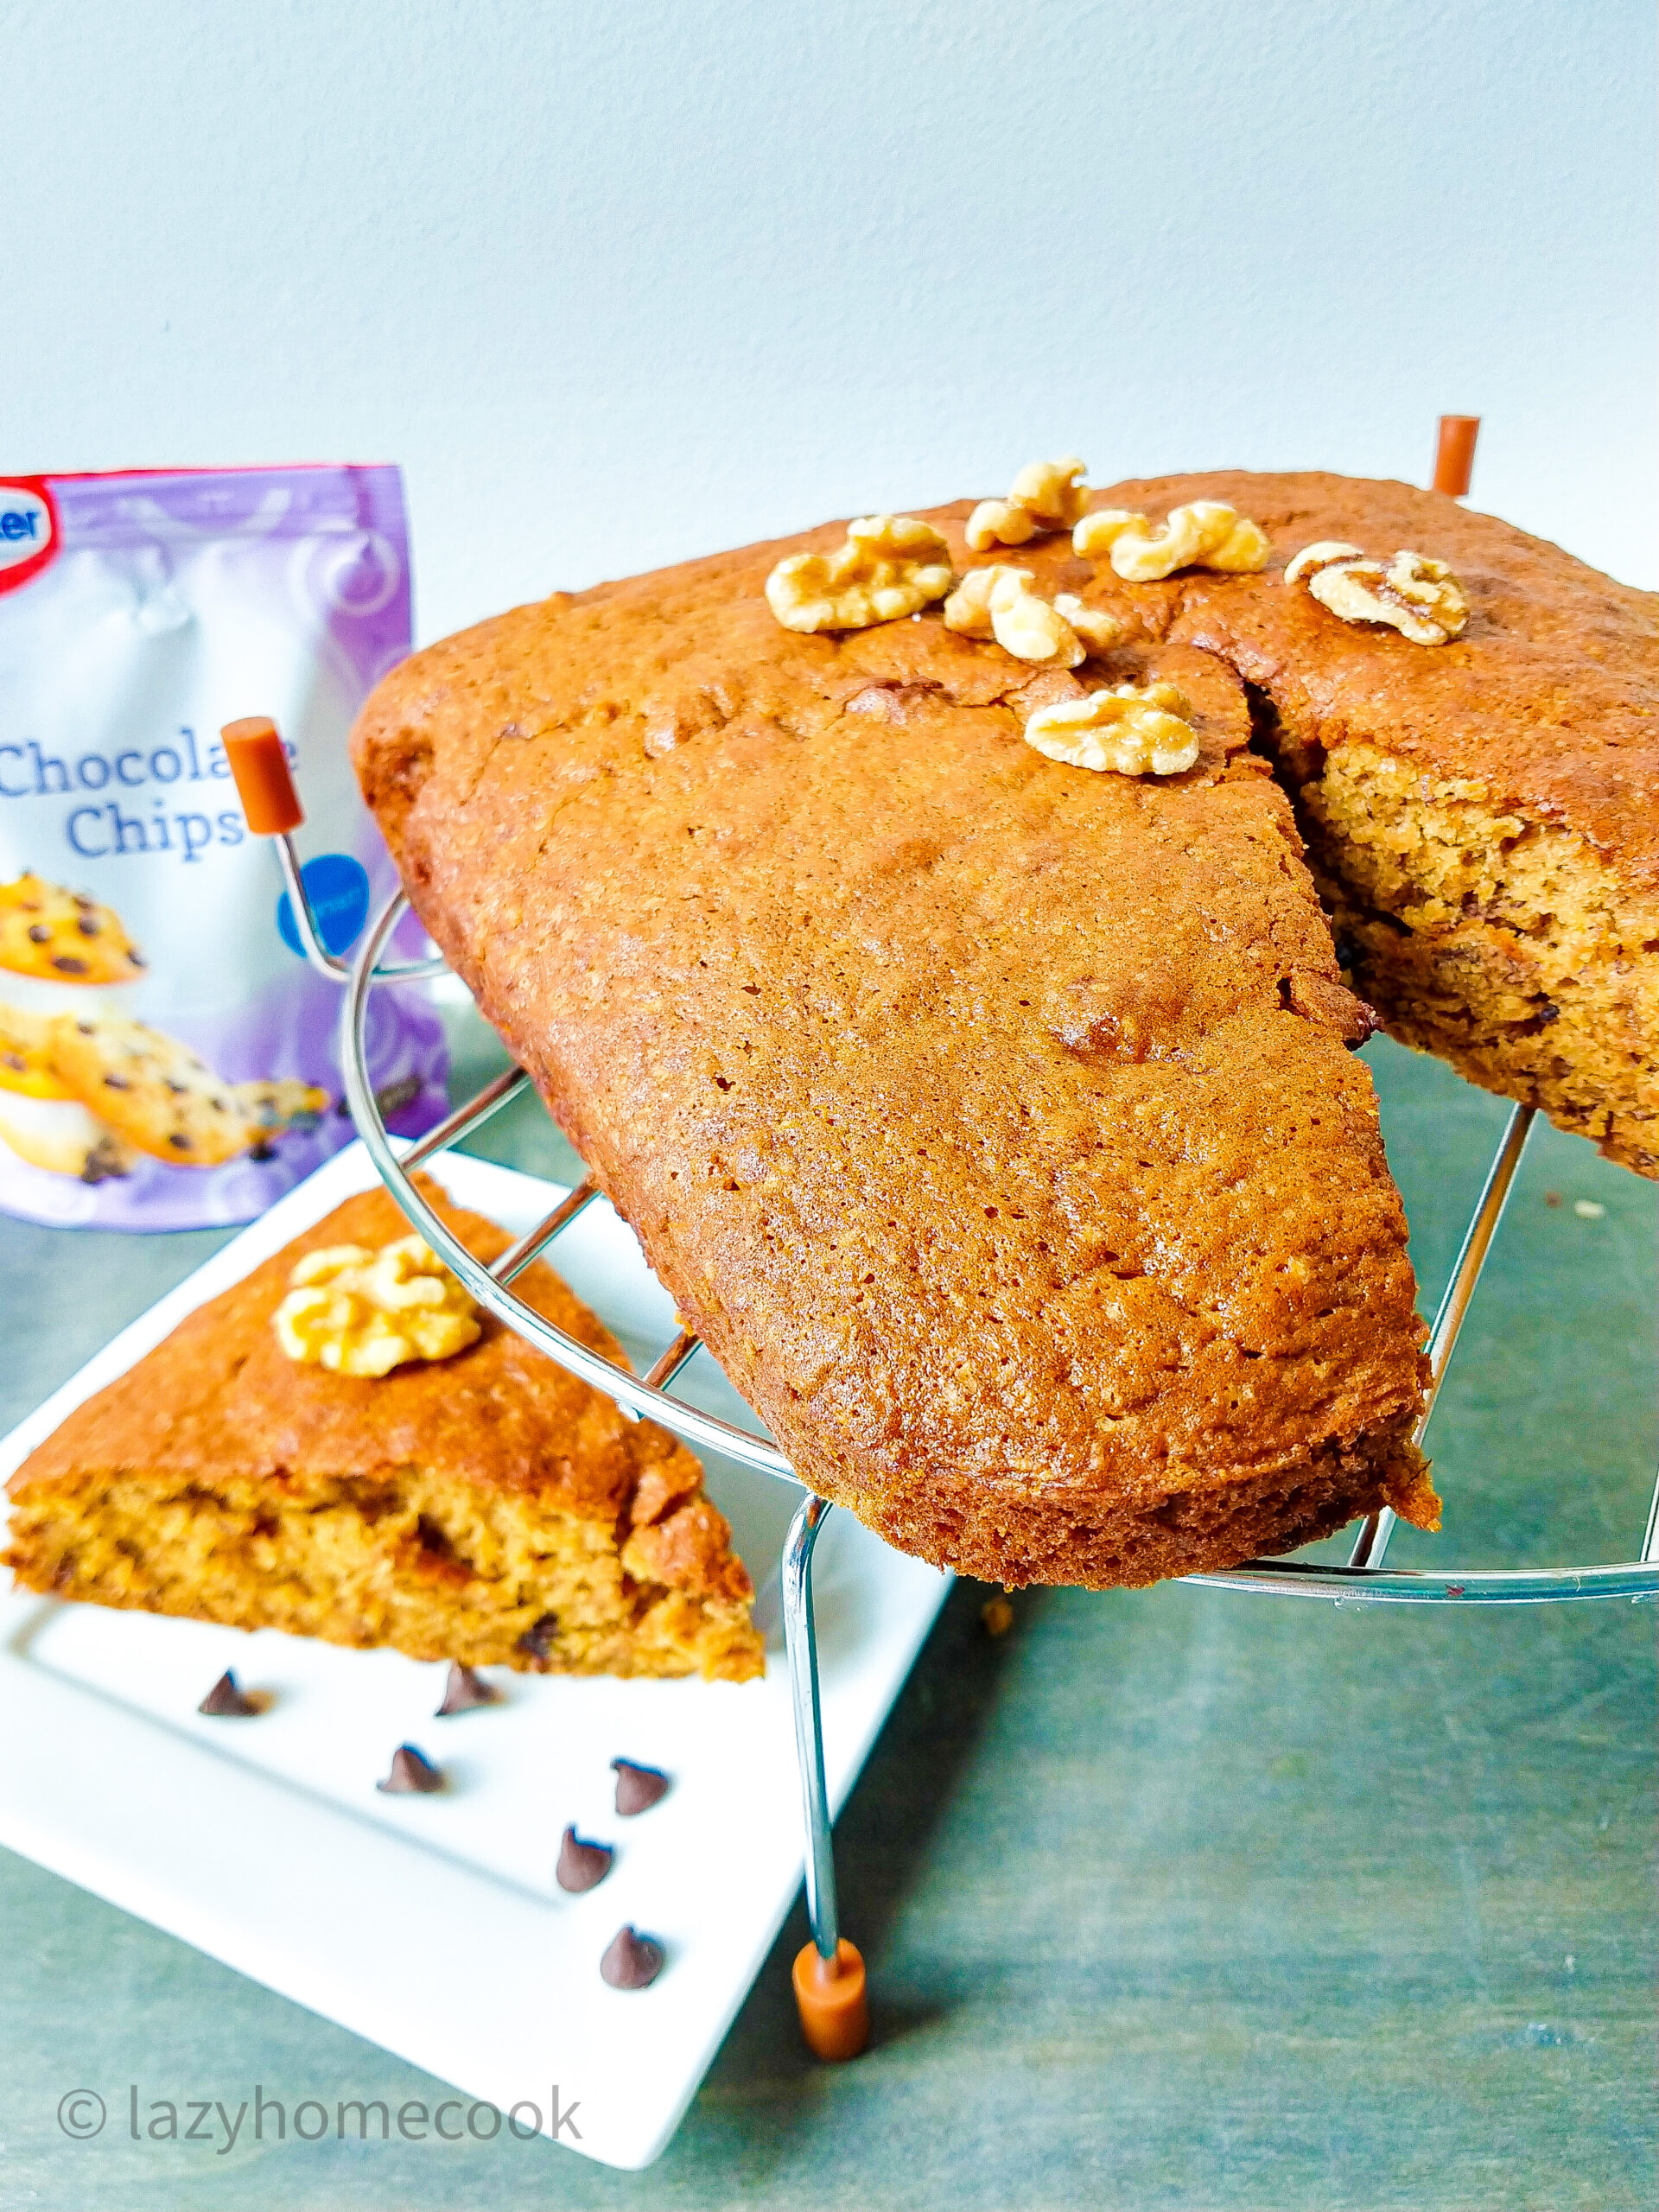 Banana cake with oil, walnuts and chocolate chips recipe (dairy free)